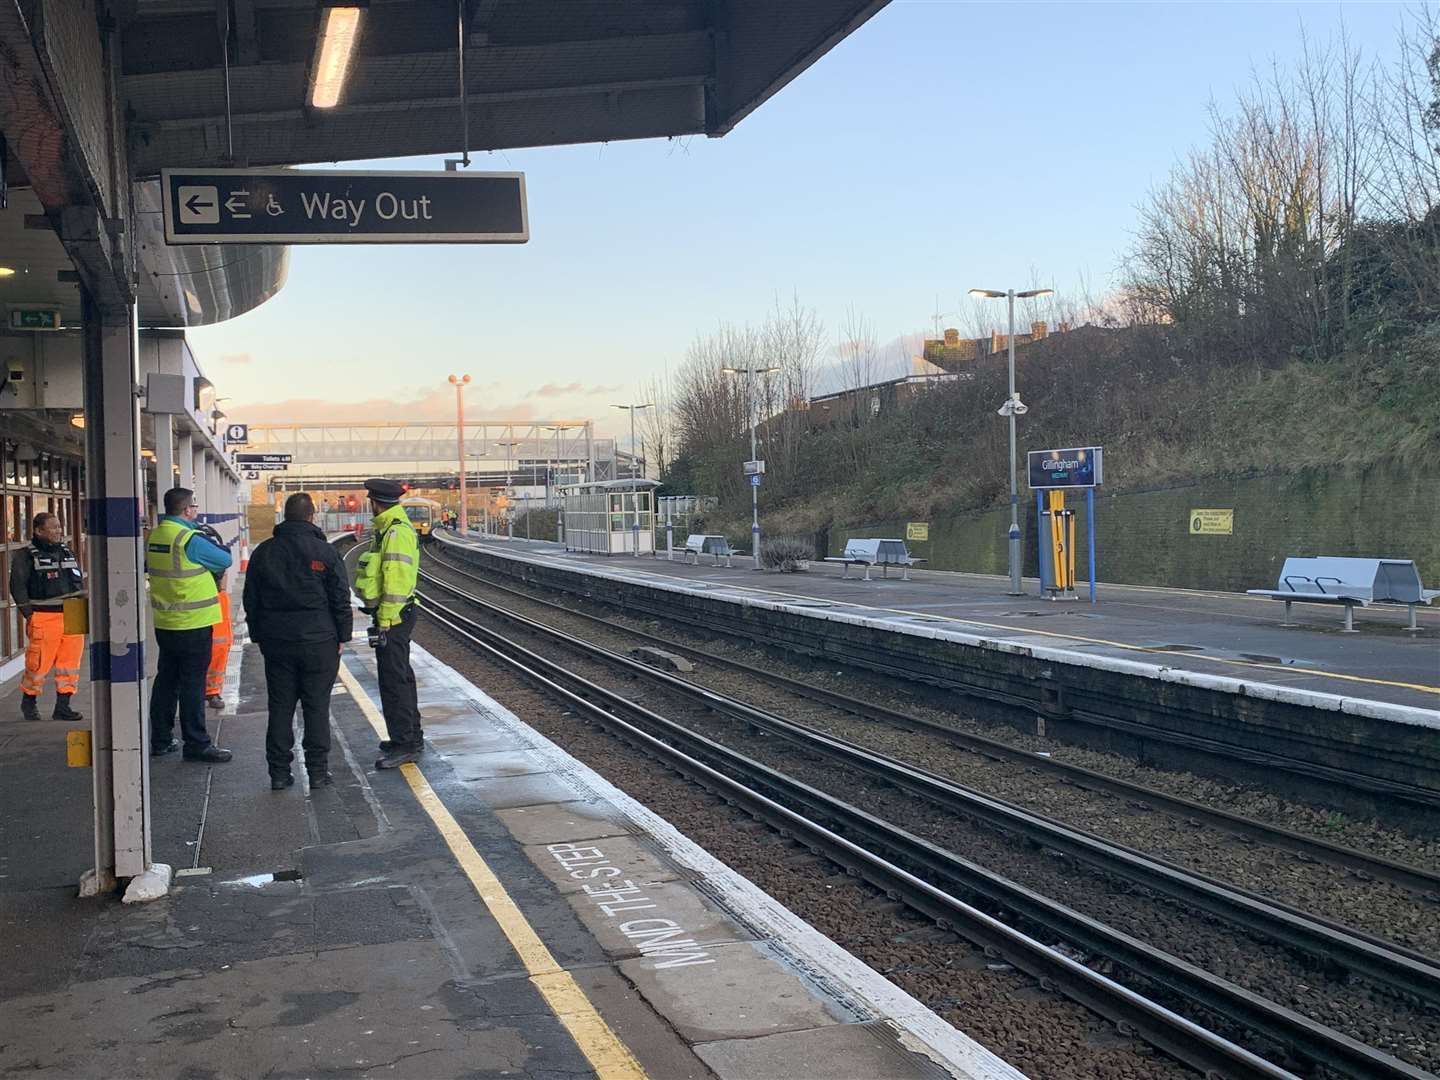 Services were cancelled after a person was hit by a train at Gillingham railway station earlier